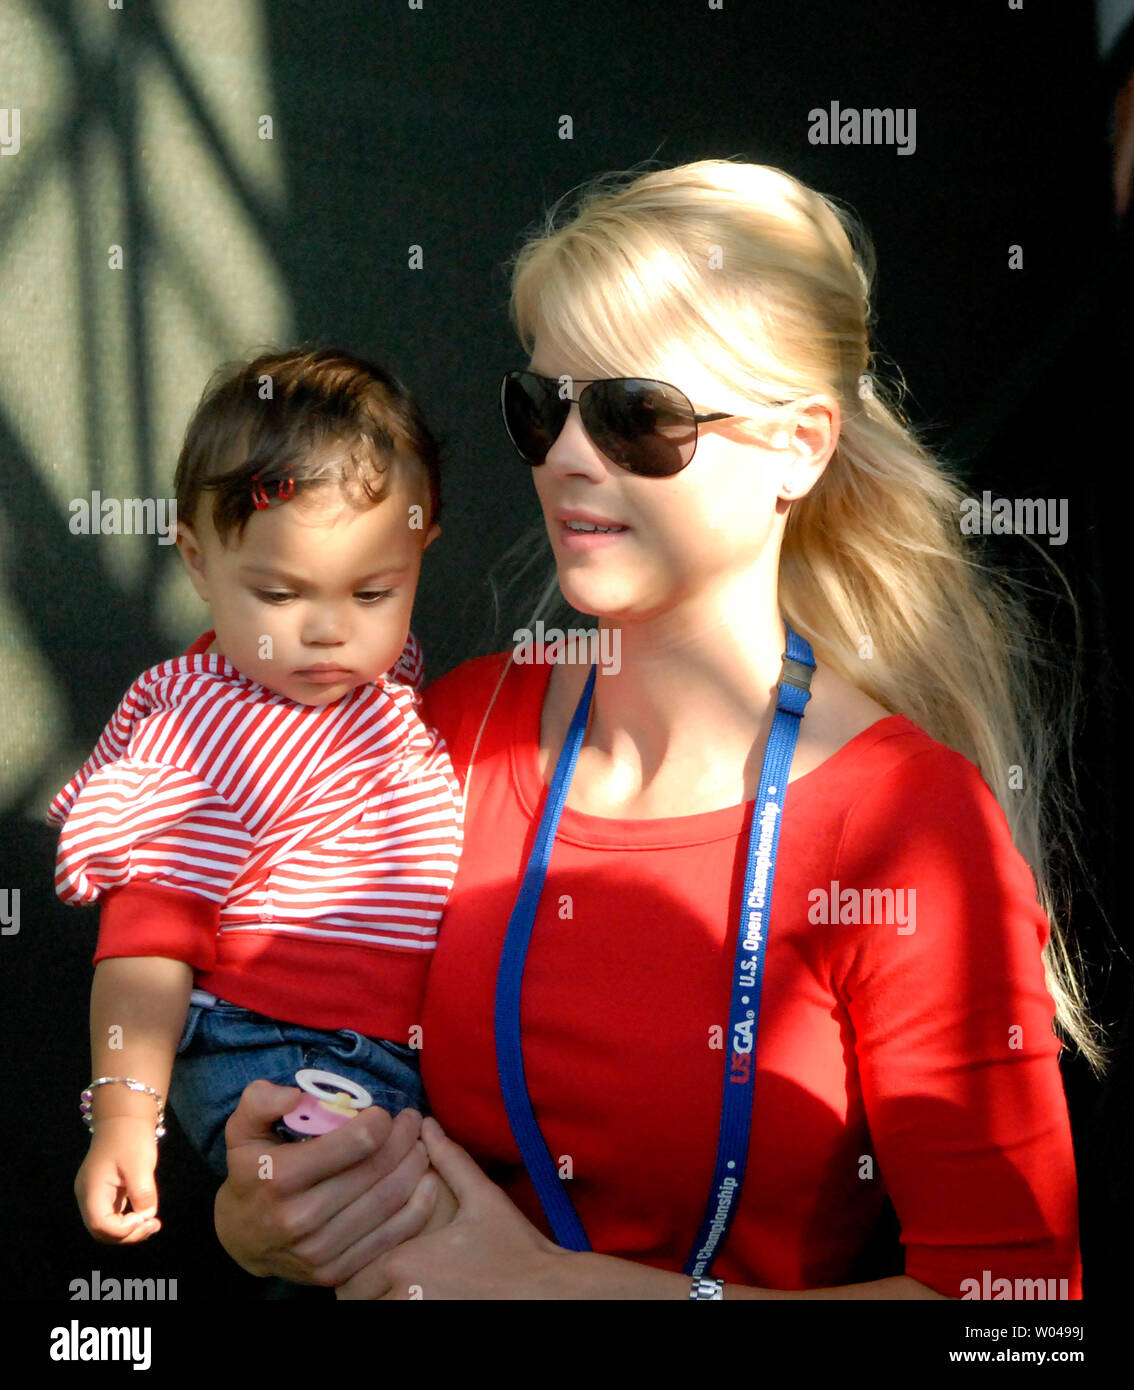 Tiger Woods's wife Elin Nordegren carries their baby girl Sam as they watch Woods putt on the 18th green during the final round of the US Open at Torrey Pines Golf Course in San Diego on June 15, 2008. Woods finished his round tied for first with Rocco Mediate. A playoff round between Woods and Mediate will be held tomorrow. (UPI Photo/Earl Cryer) Stock Photo